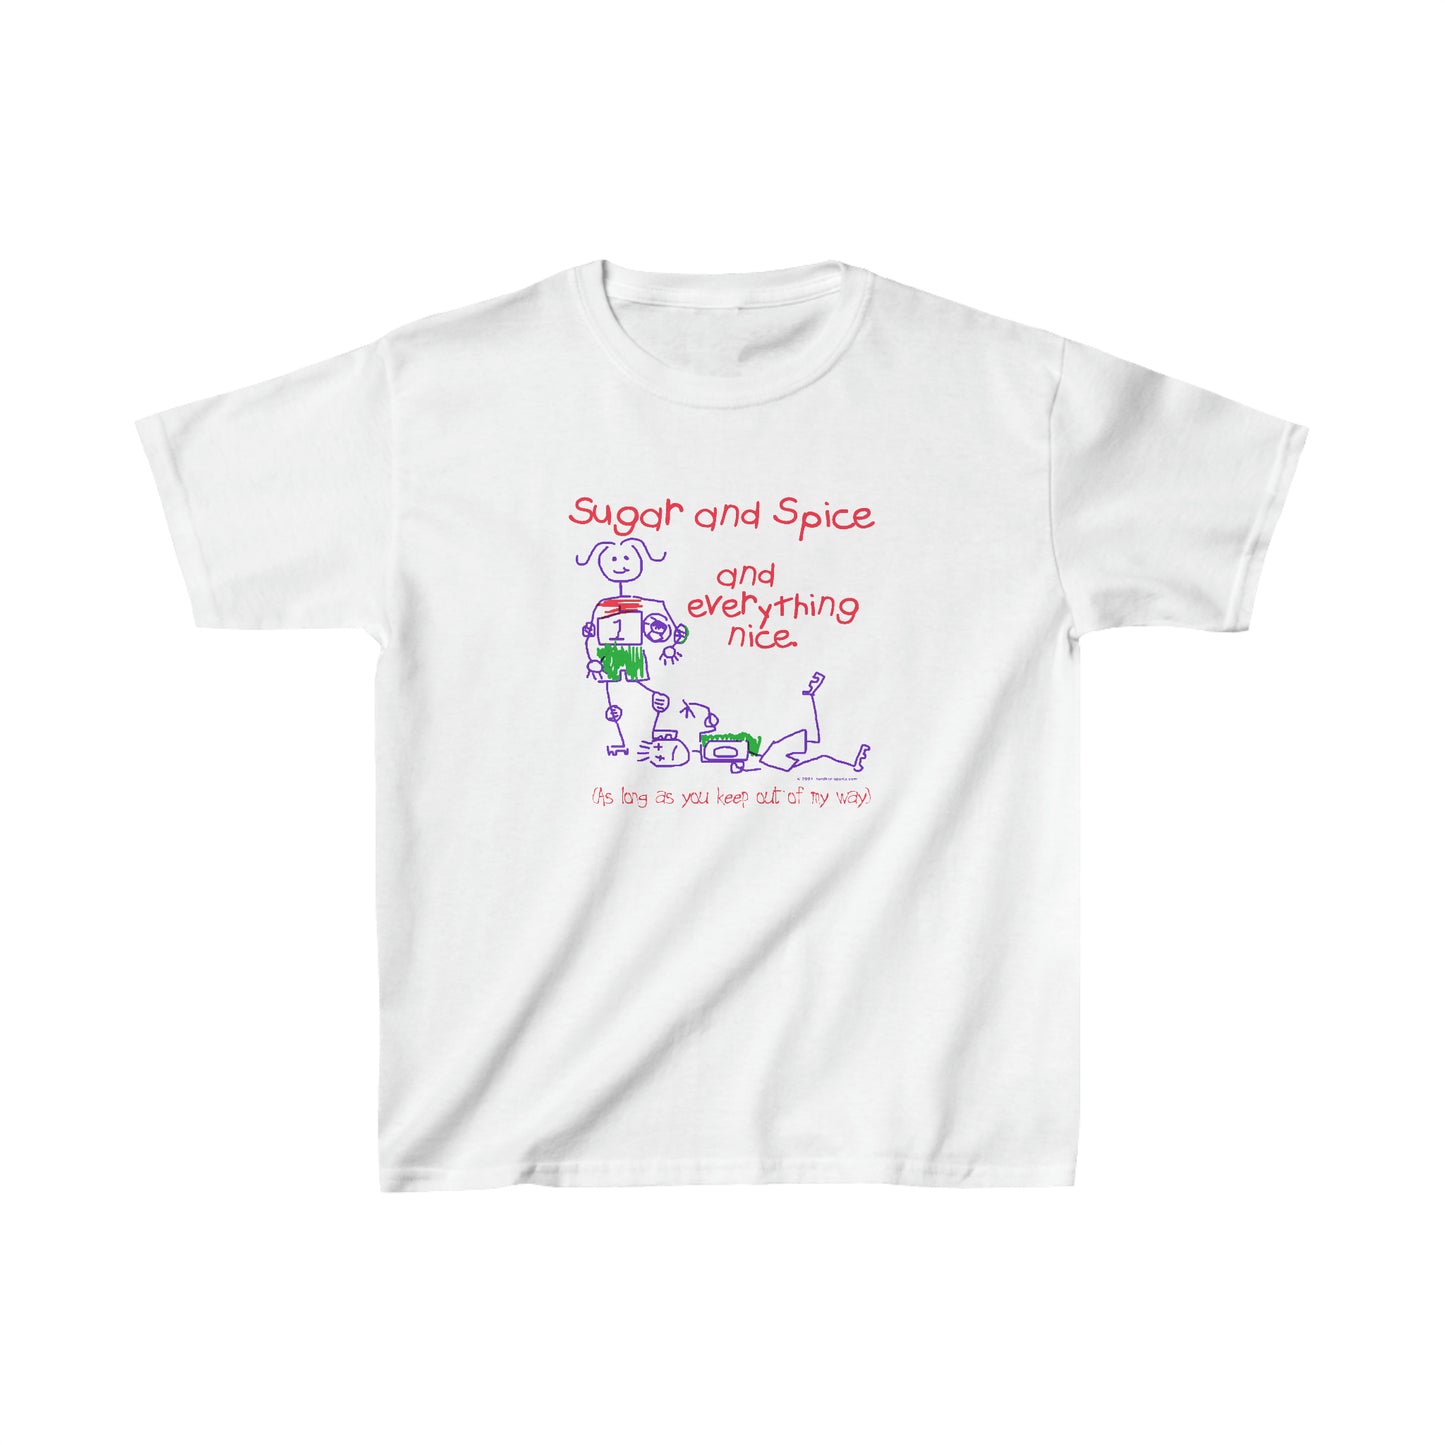 Sugar and Spice and Everything Nice As Long as You Stay Out of My Way, Girl's Soccer T-Shirt, Girl Soccer Player, Dominating Opponent